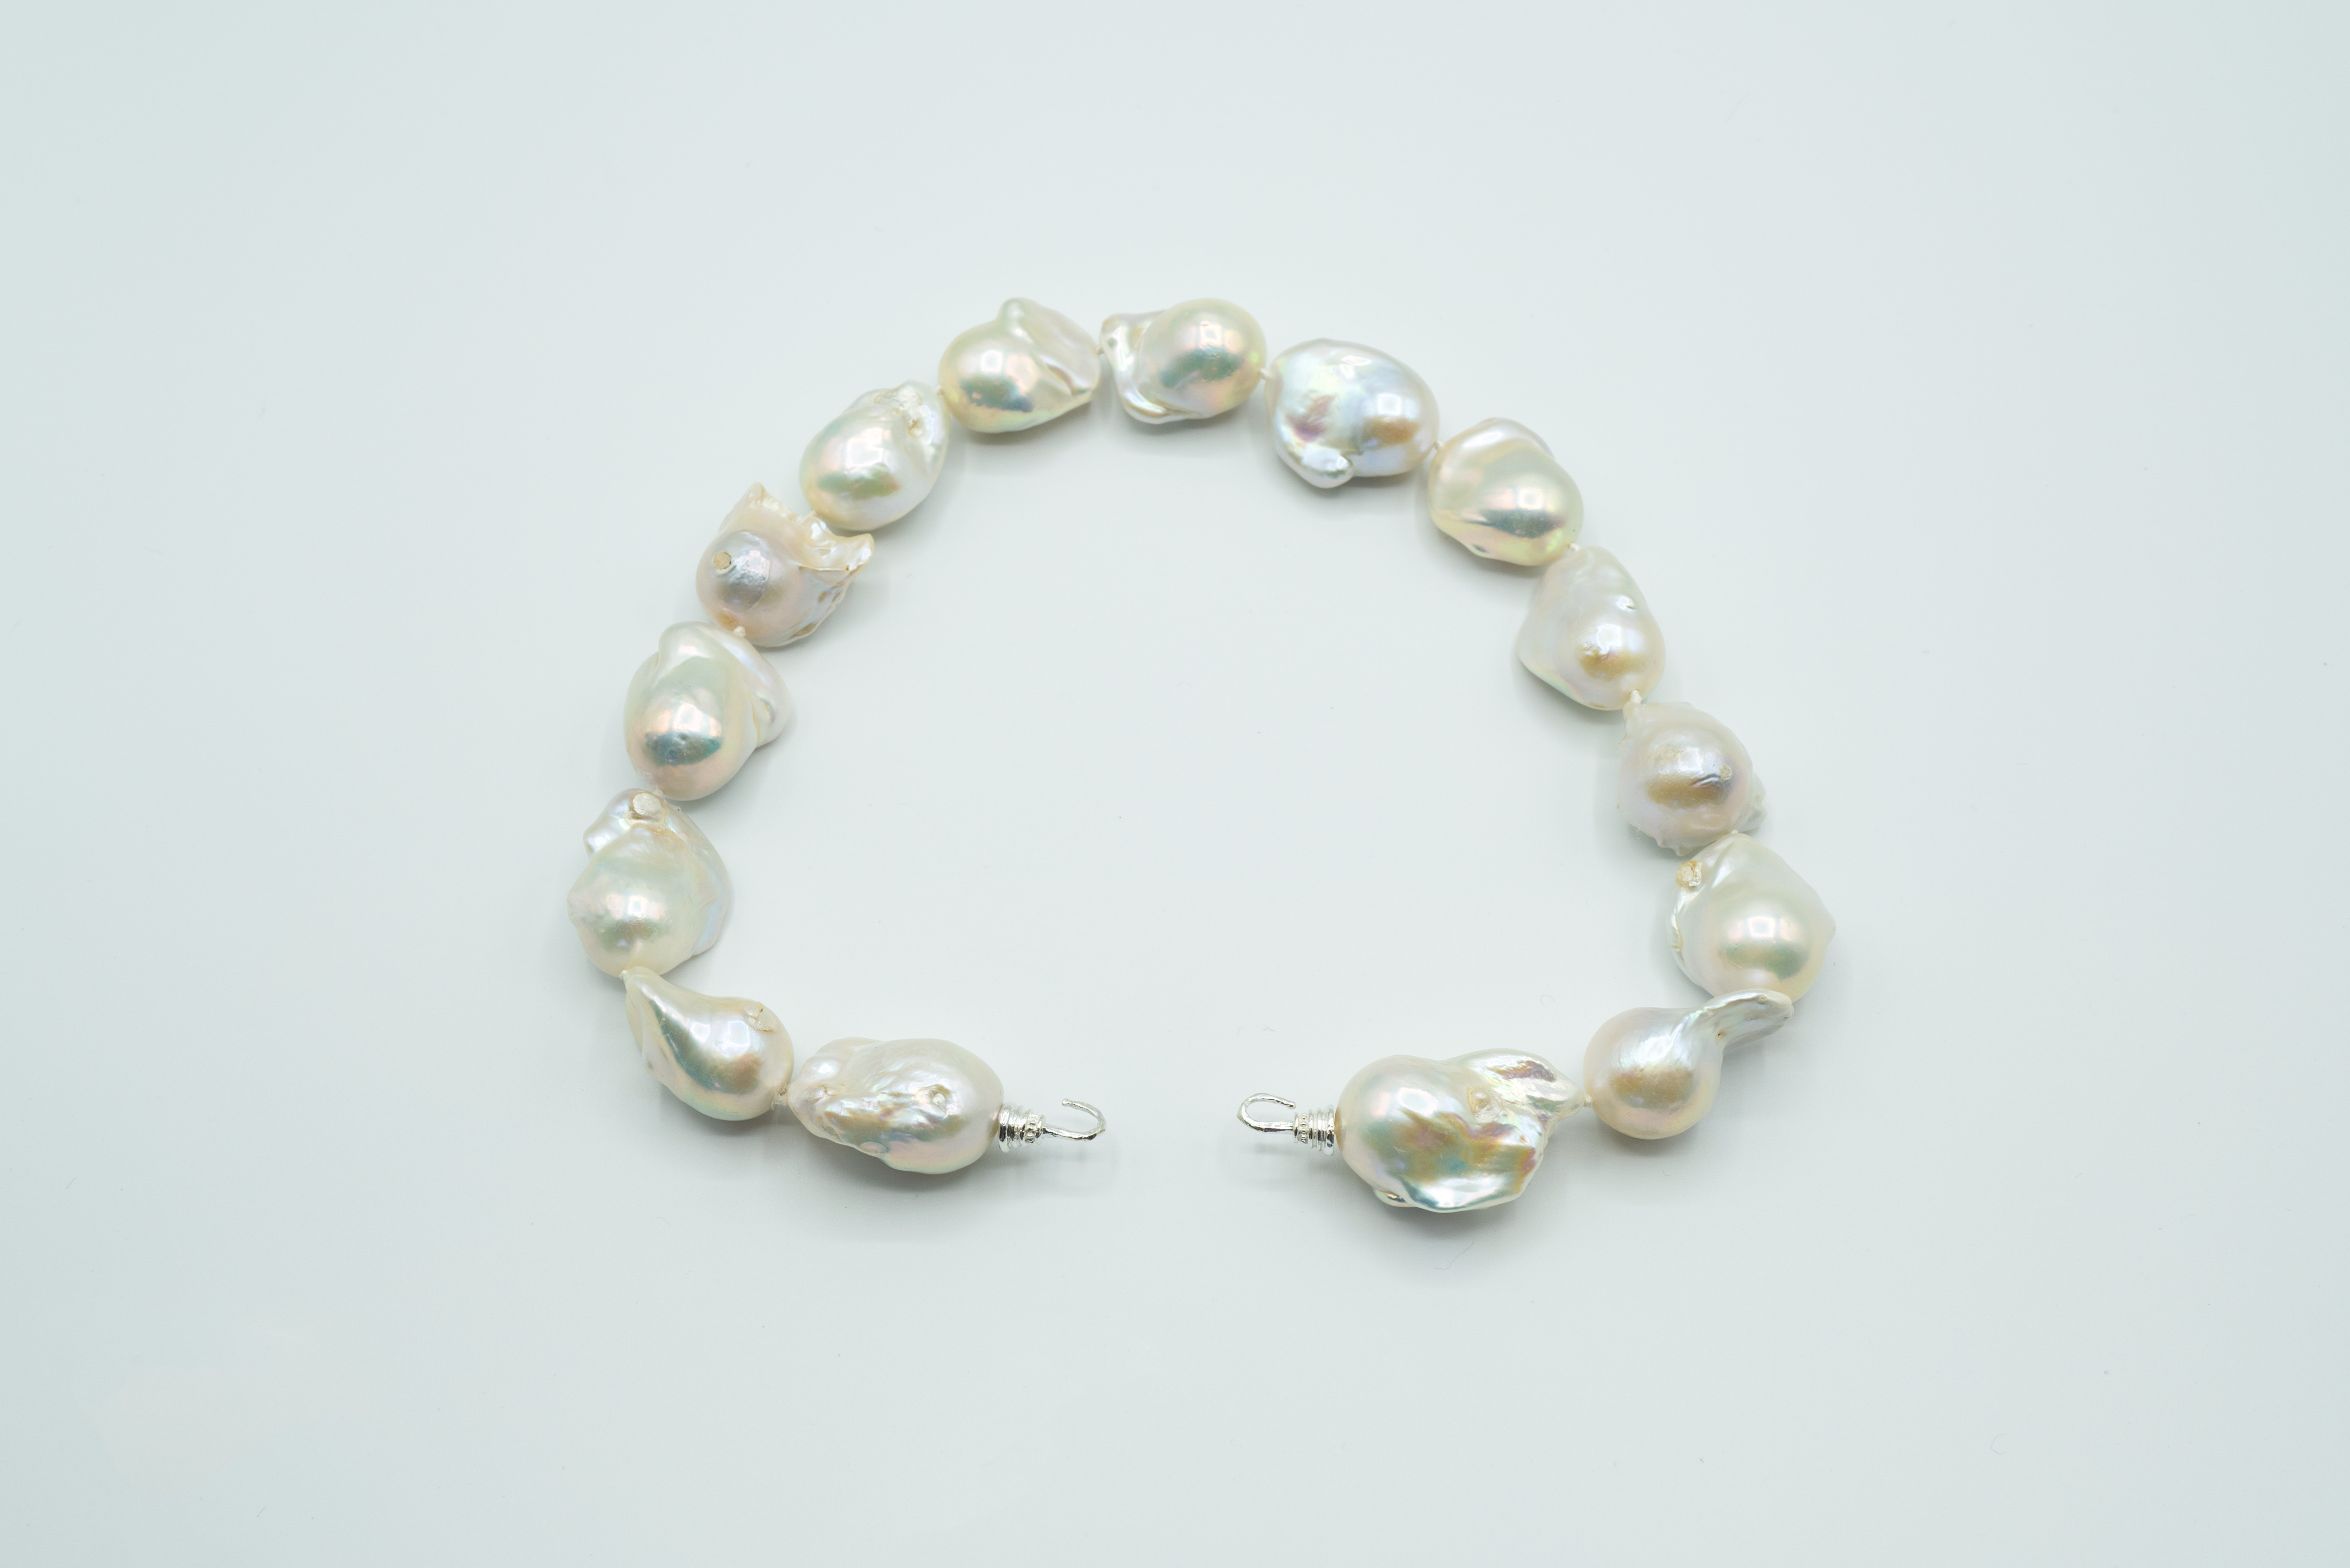 Jumbo Freshwater Baroque Pearls, Smooth Texture Hand Knotted on Hand Cast Sterling Hooks. Unusual and rare pearls approx.